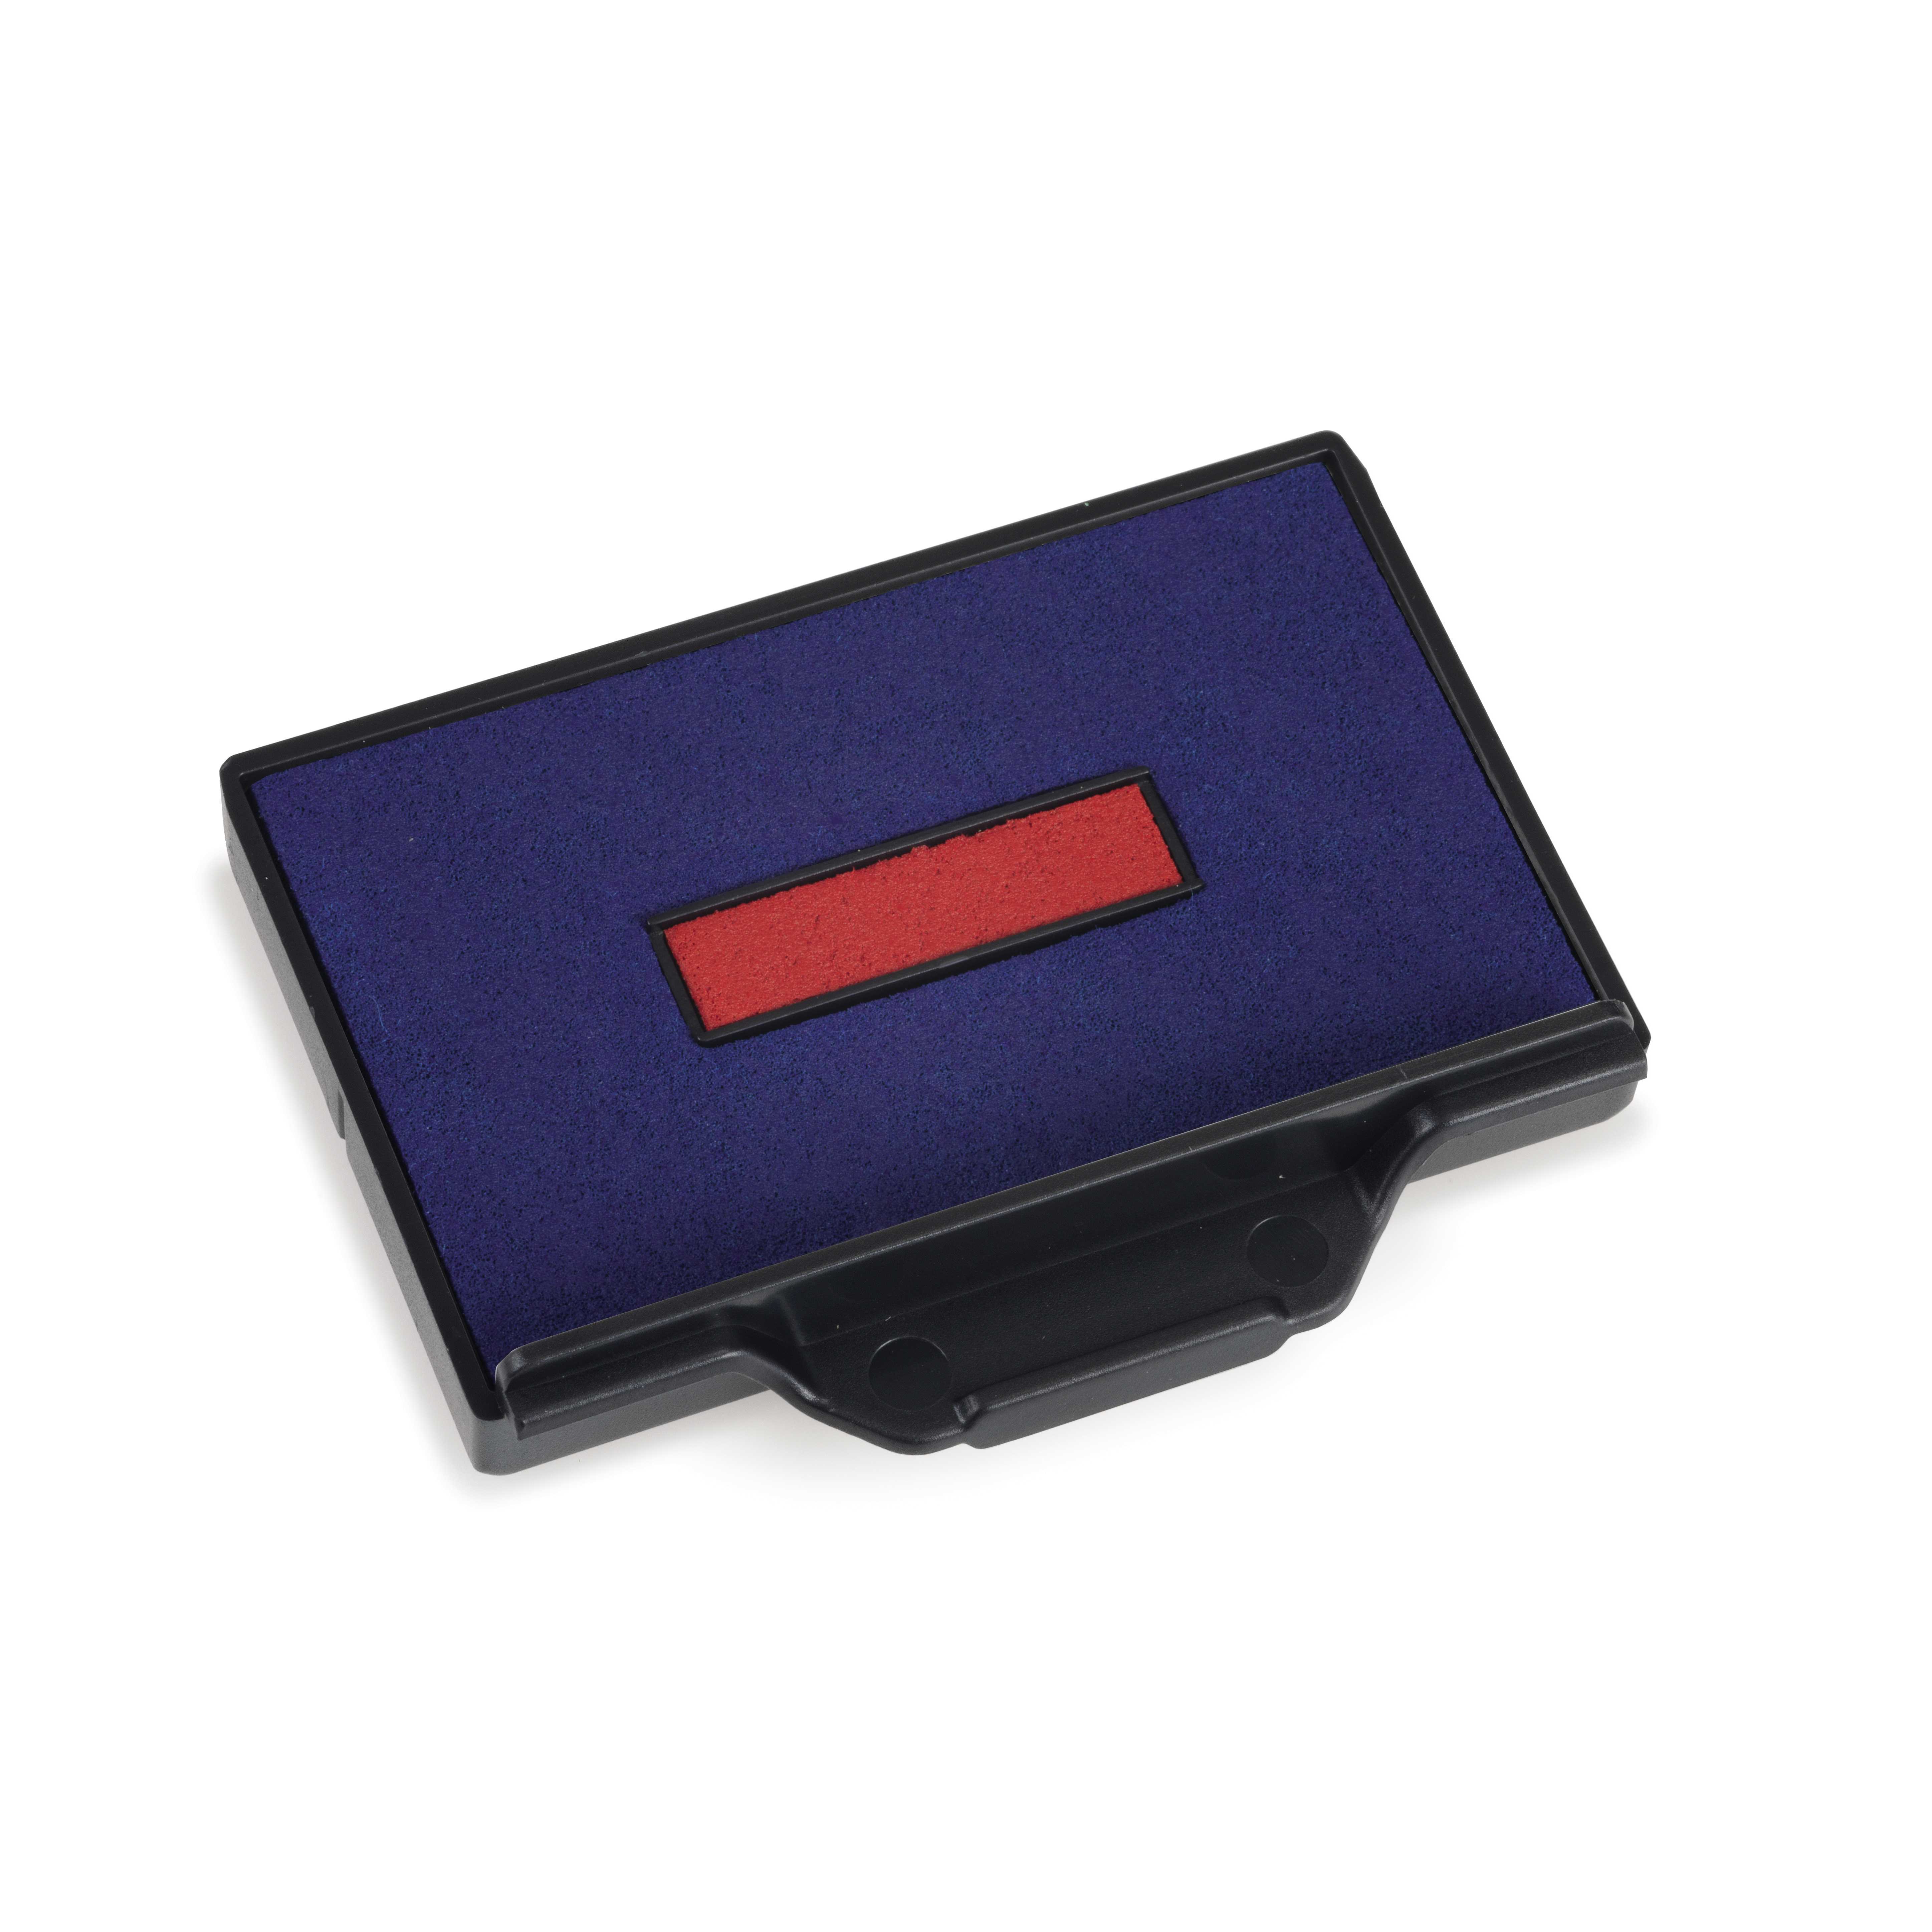 Replacement Pad for Trodat 5206 Self Inking Stamp - Blue/Red Ink Color